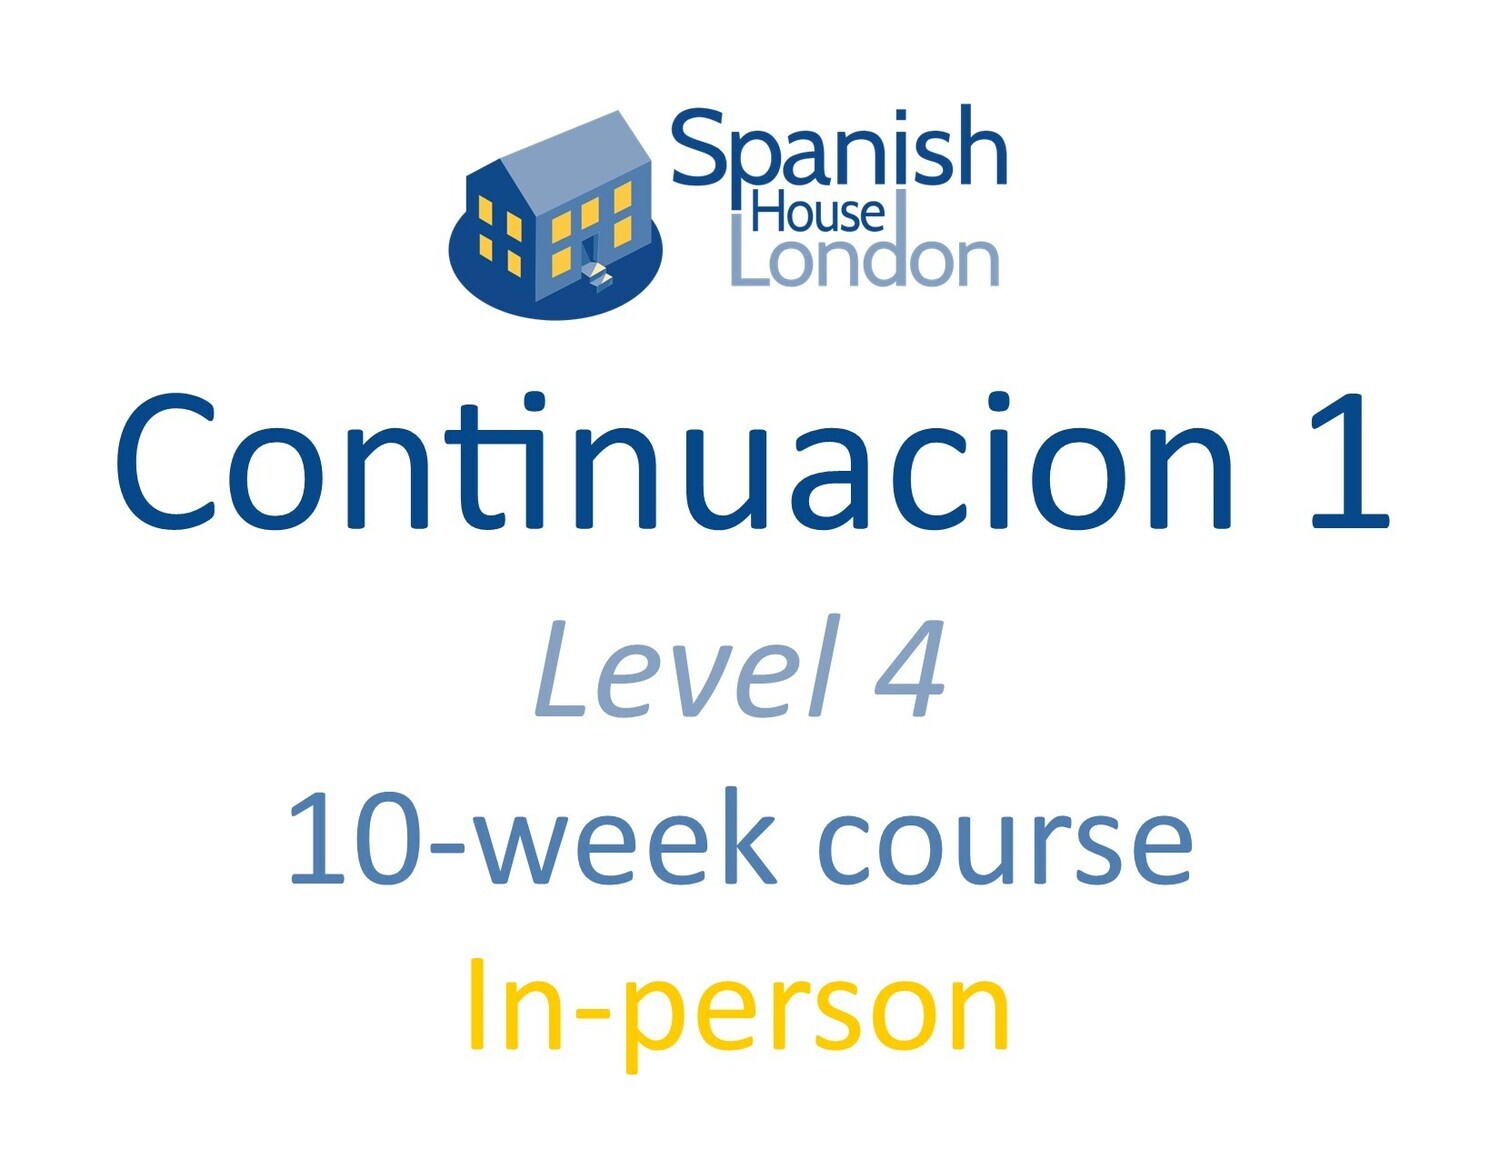 Continuacion 1 Course starting on 2nd November at 6pm in Euston / King's Cross